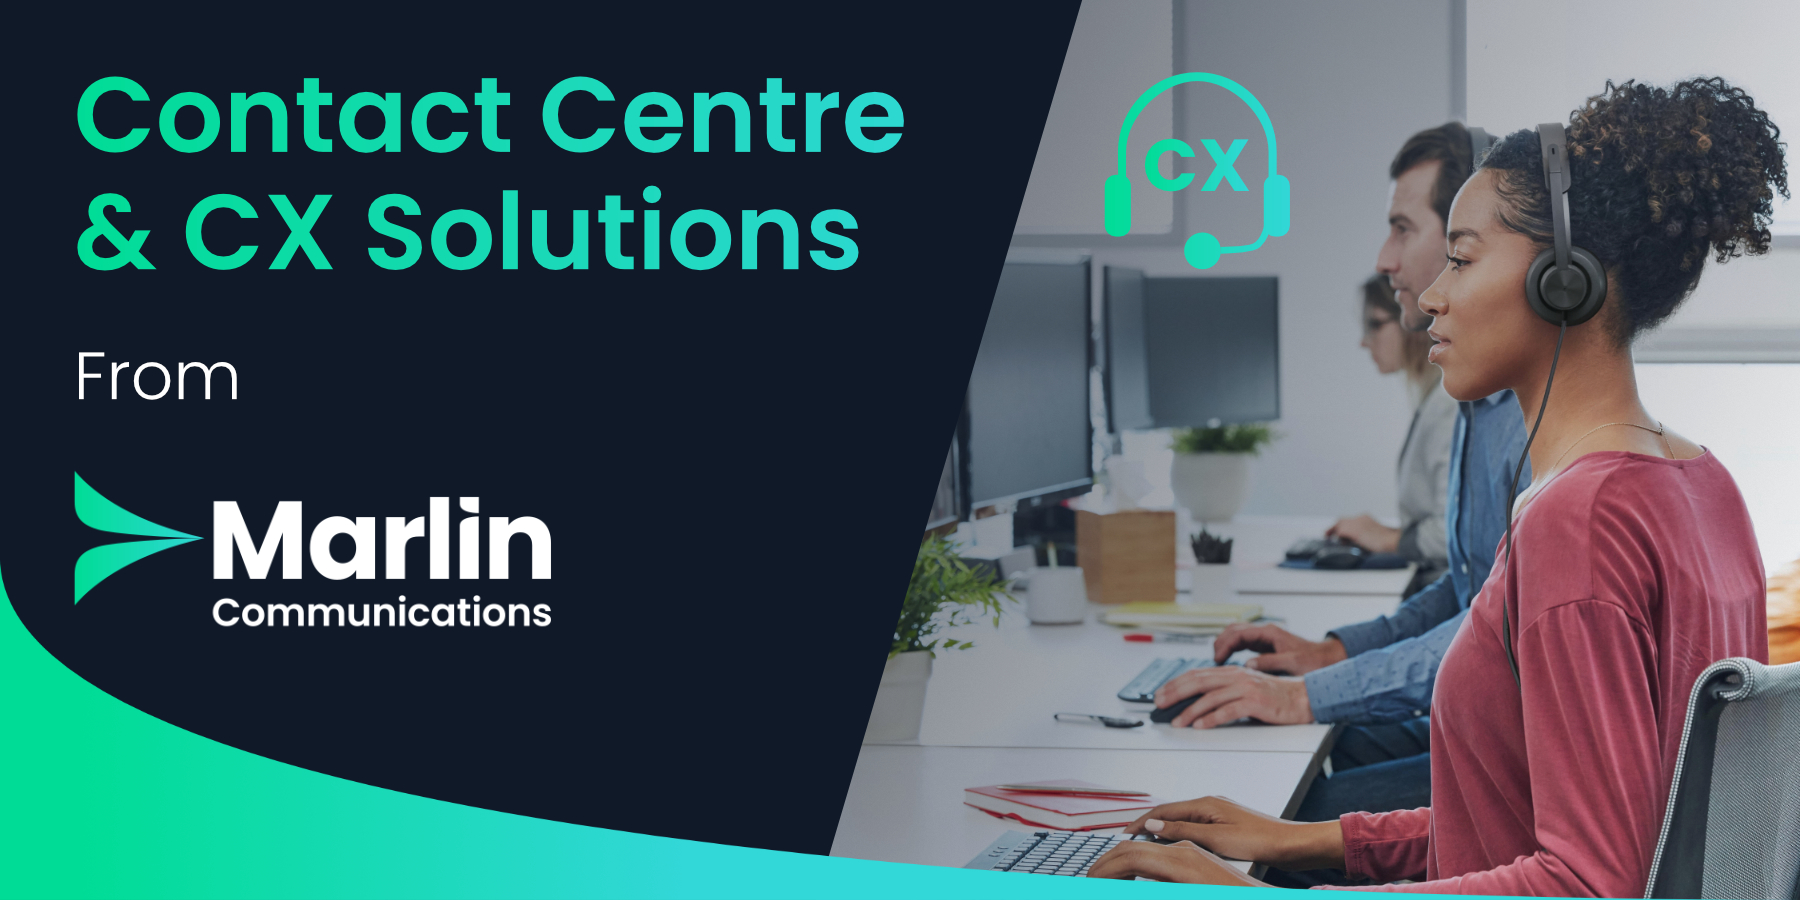 Featured image for “Contact Centre & CX Solutions From Marlin Communications”